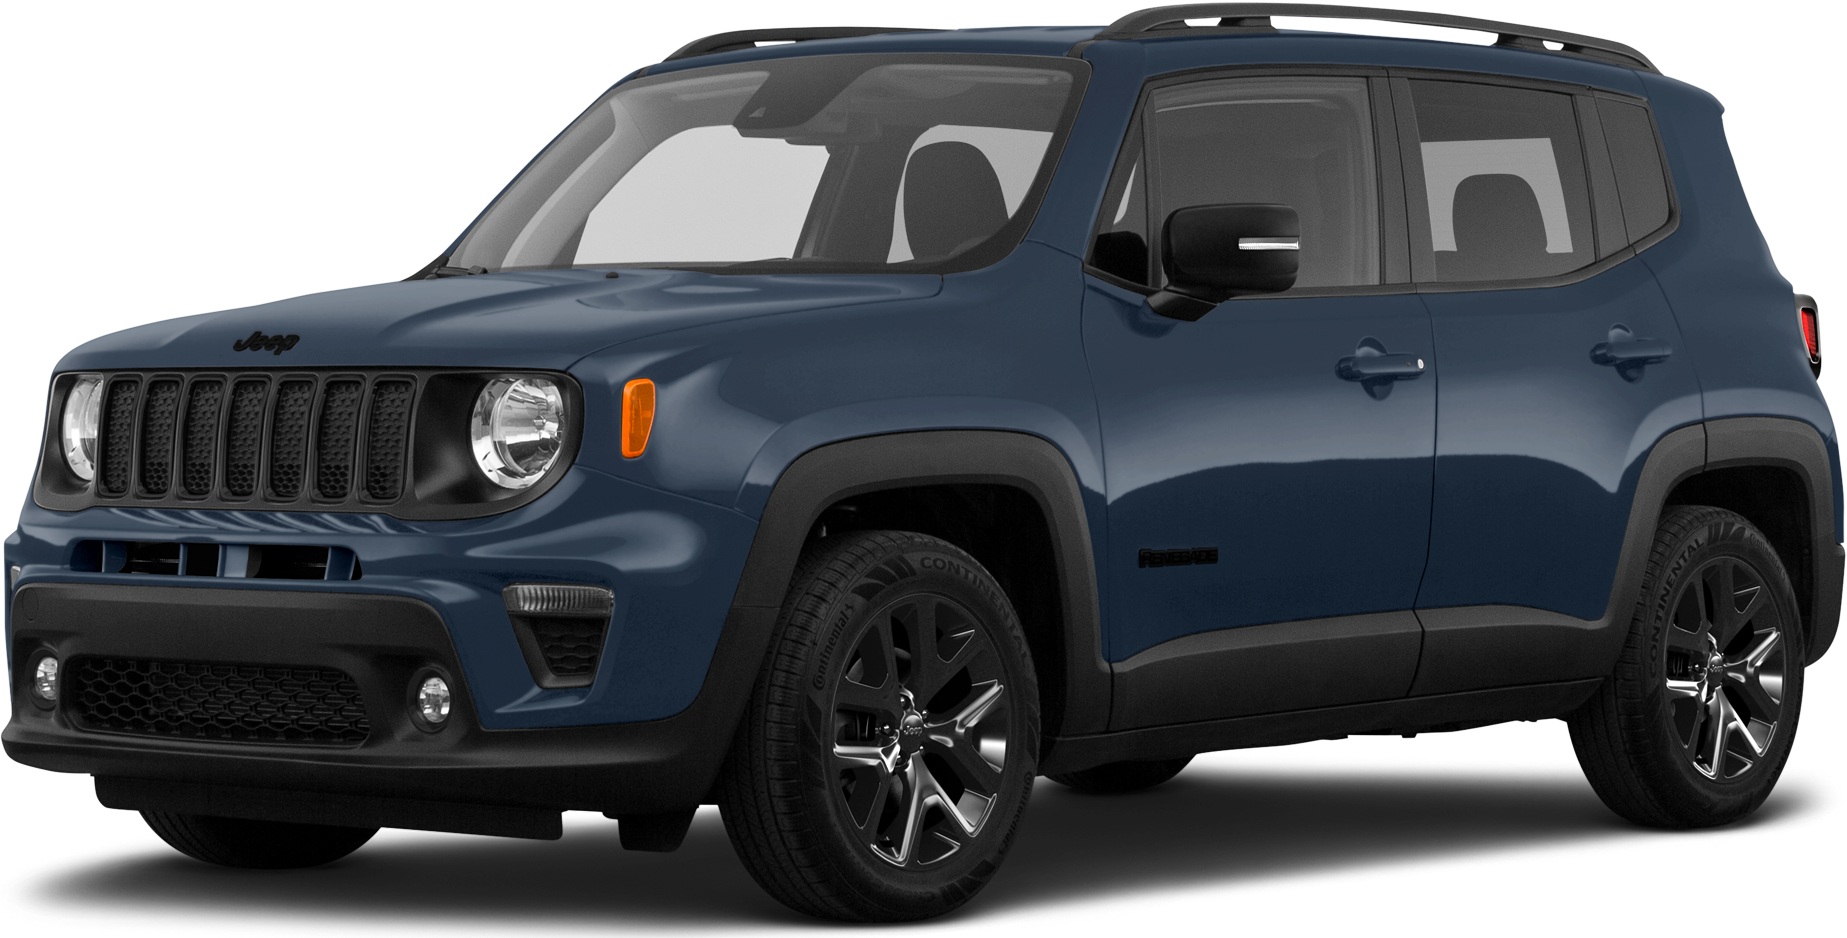 https://file.kelleybluebookimages.com/kbb/base/evox/CP/51837/2023-Jeep-Renegade-front_51837_032_1847x938_PBF_cropped.png